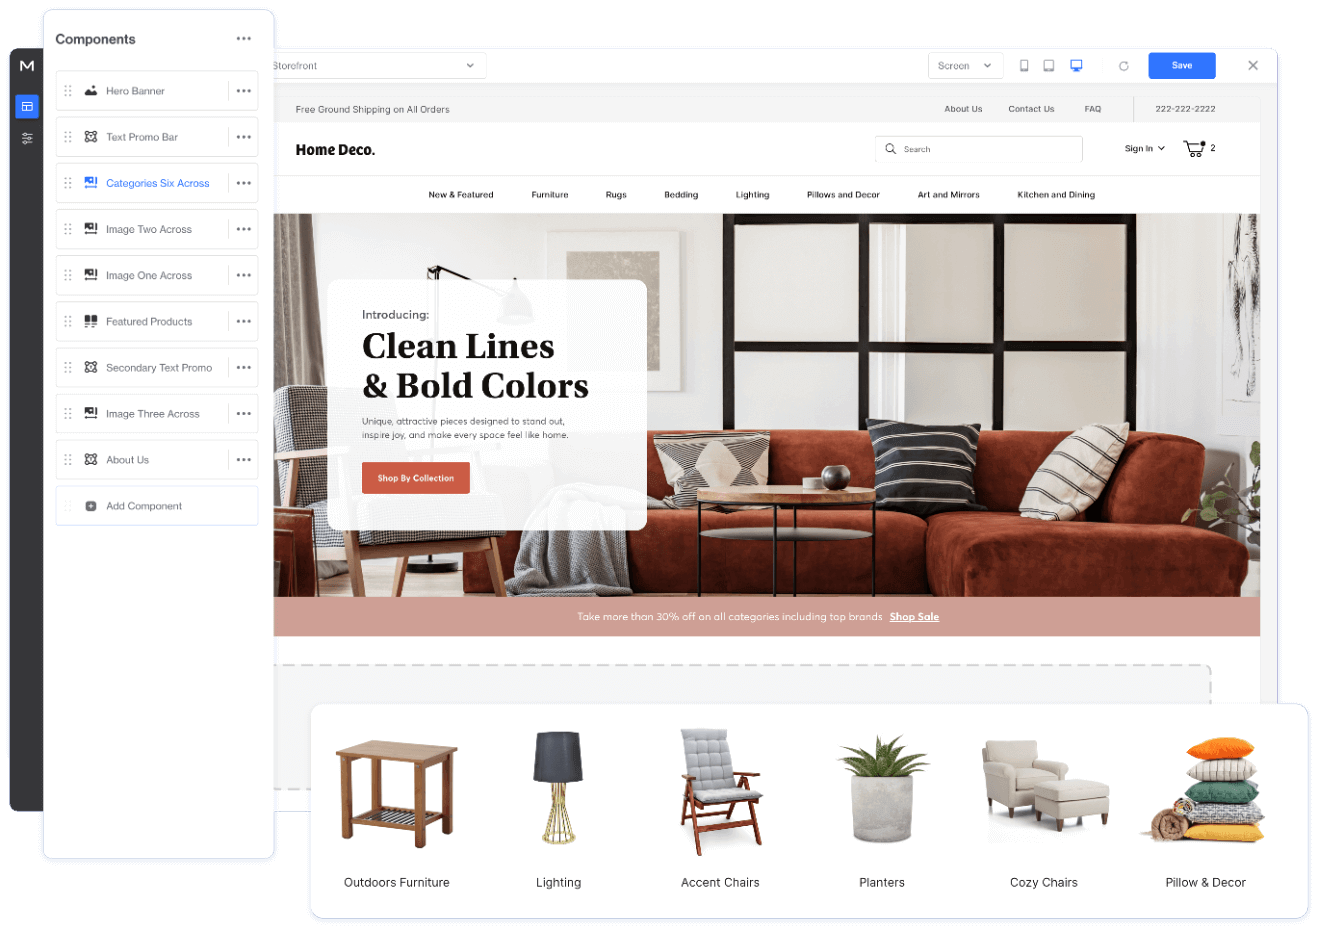 Homepage of furniture website with PageBuilder components highlighted.